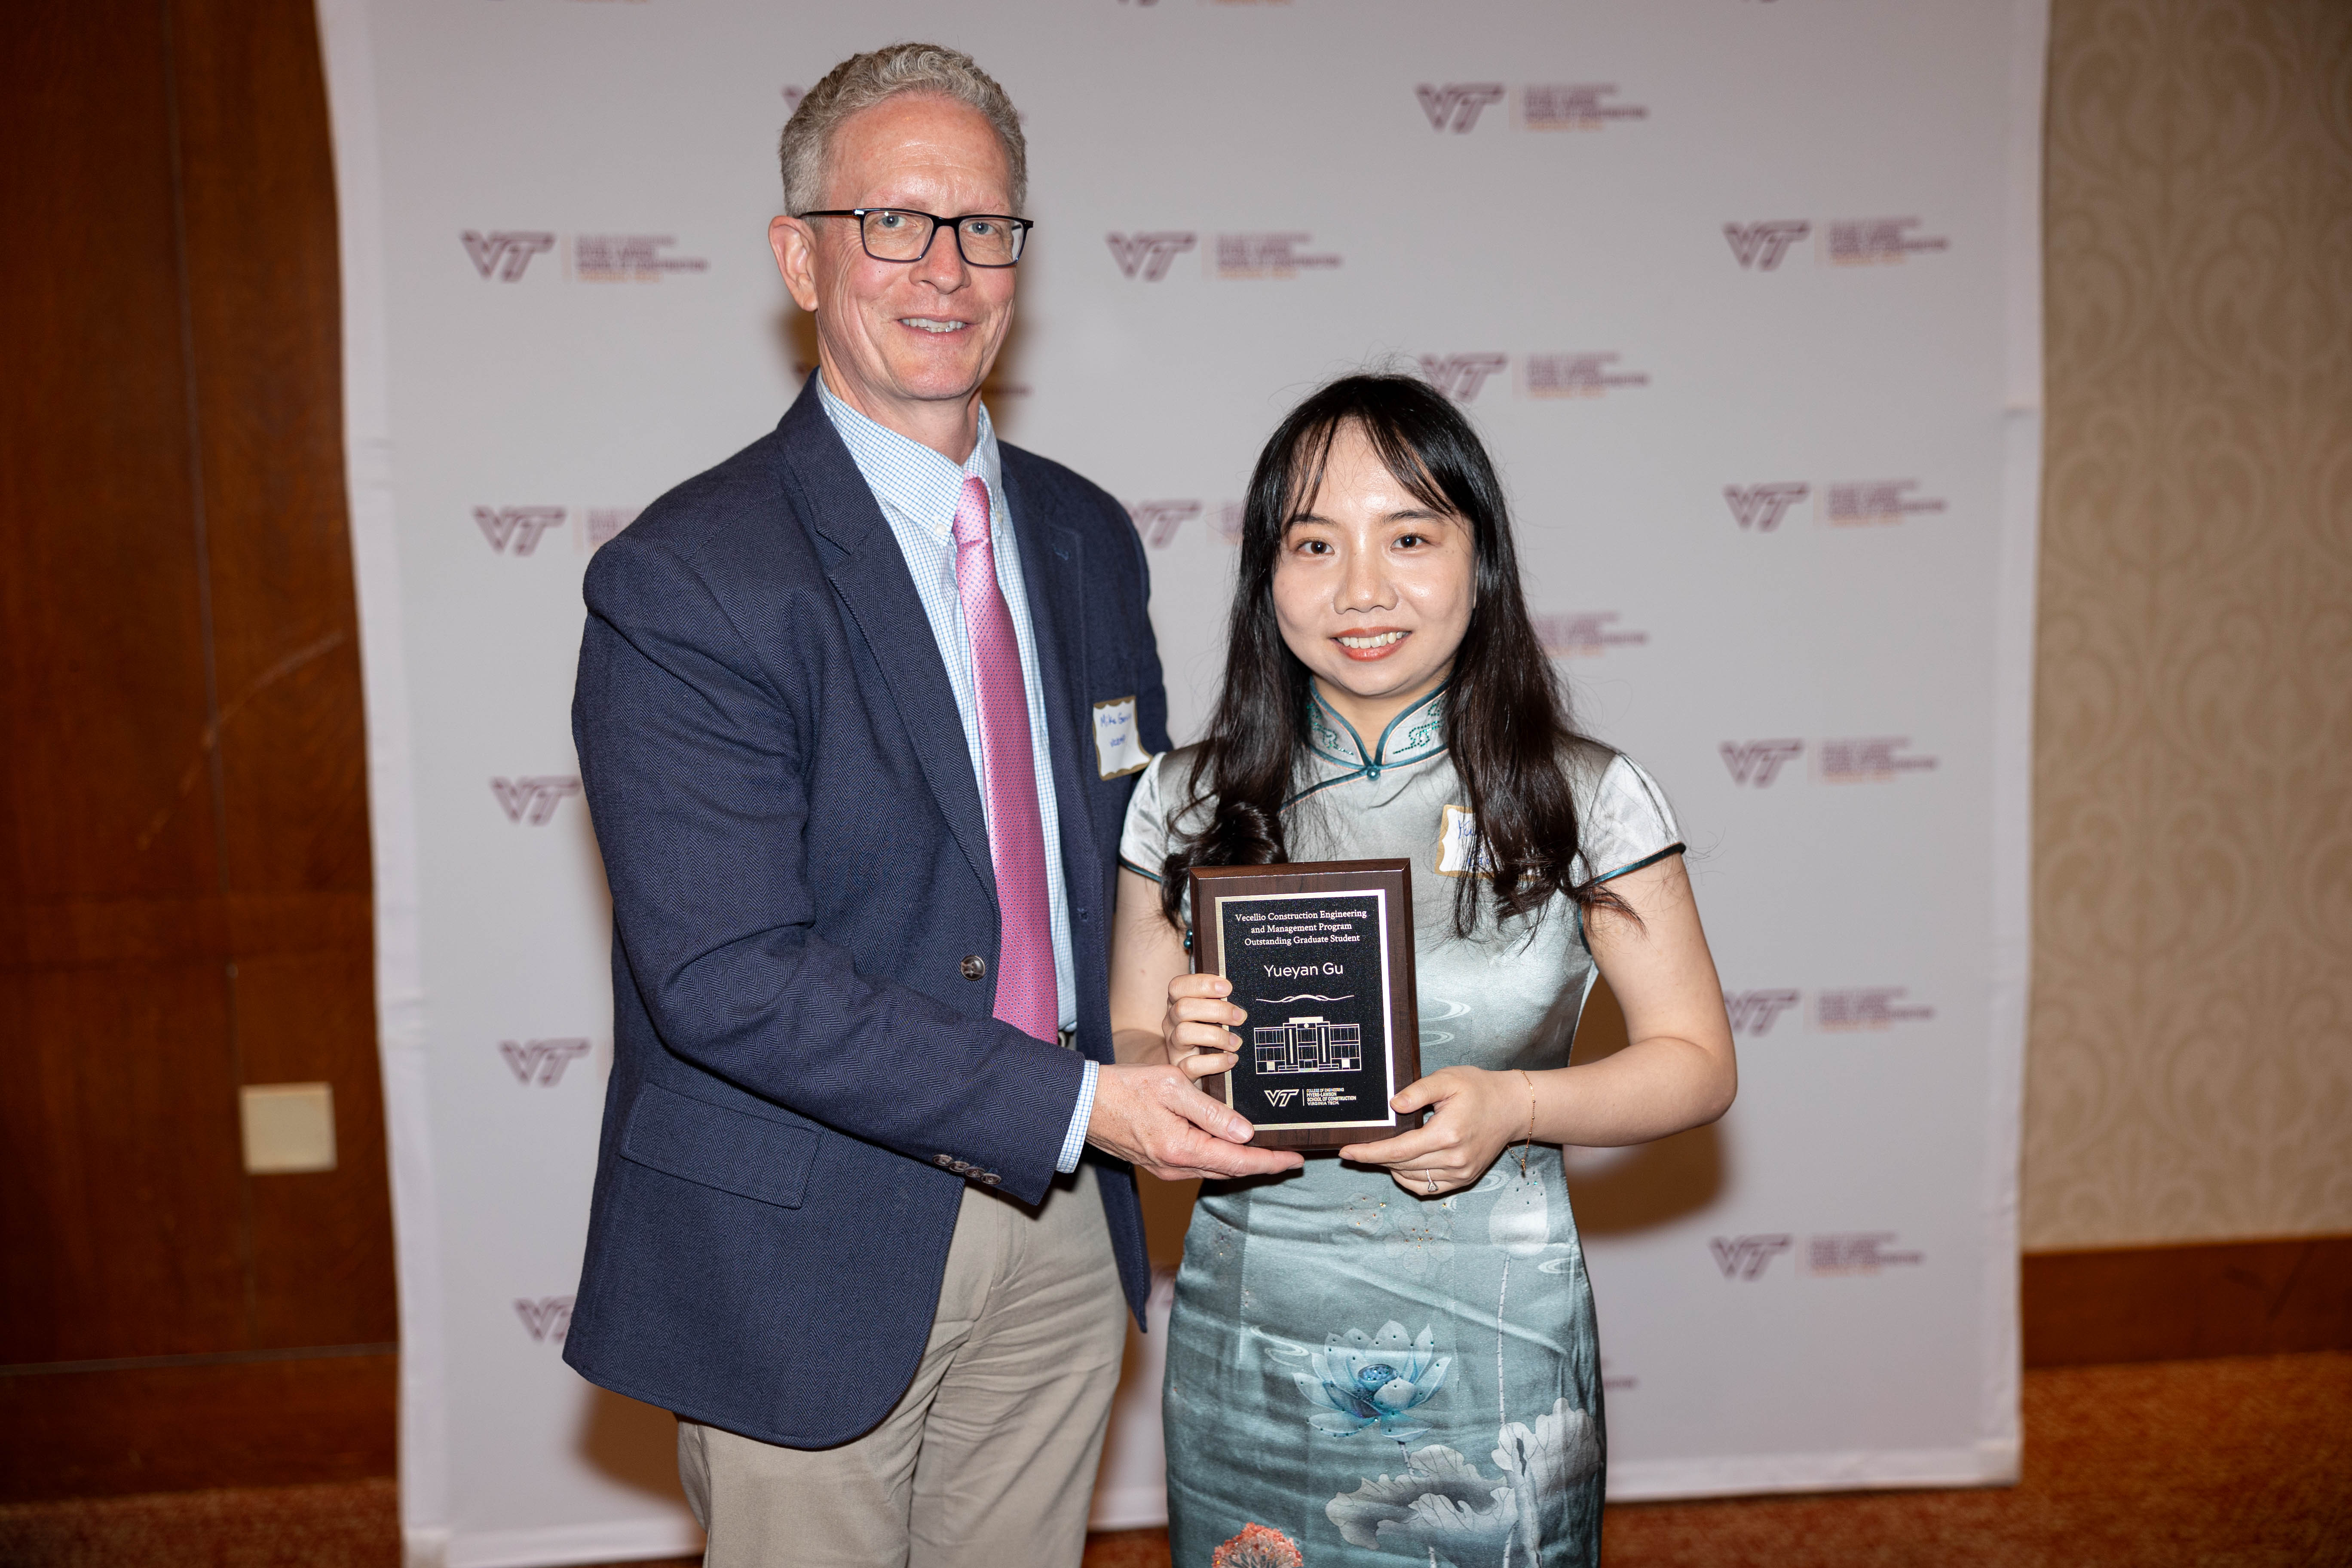 Michael Garvin (at left) with Yueyan Gu. Photo by Will Drew for Virginia Tech.